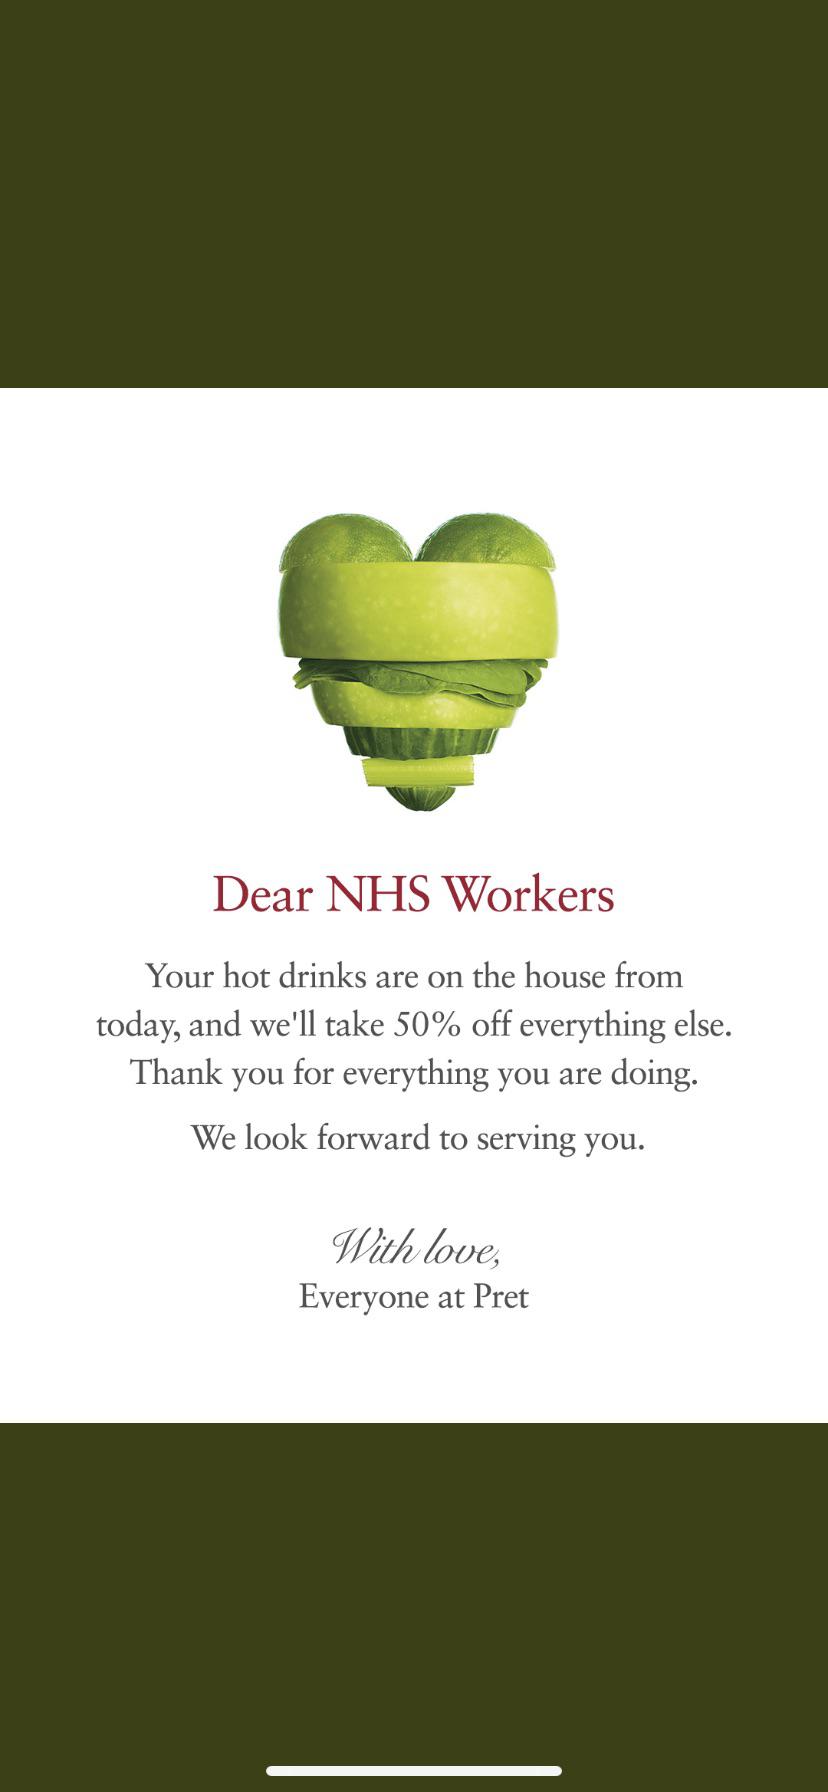 leaf - Dear Nhs Workers Your hot drinks are on the house from today, and we'll take 50% off everything else. Thank you for everything you are doing. We look forward to serving you. With love, Everyone at Pret